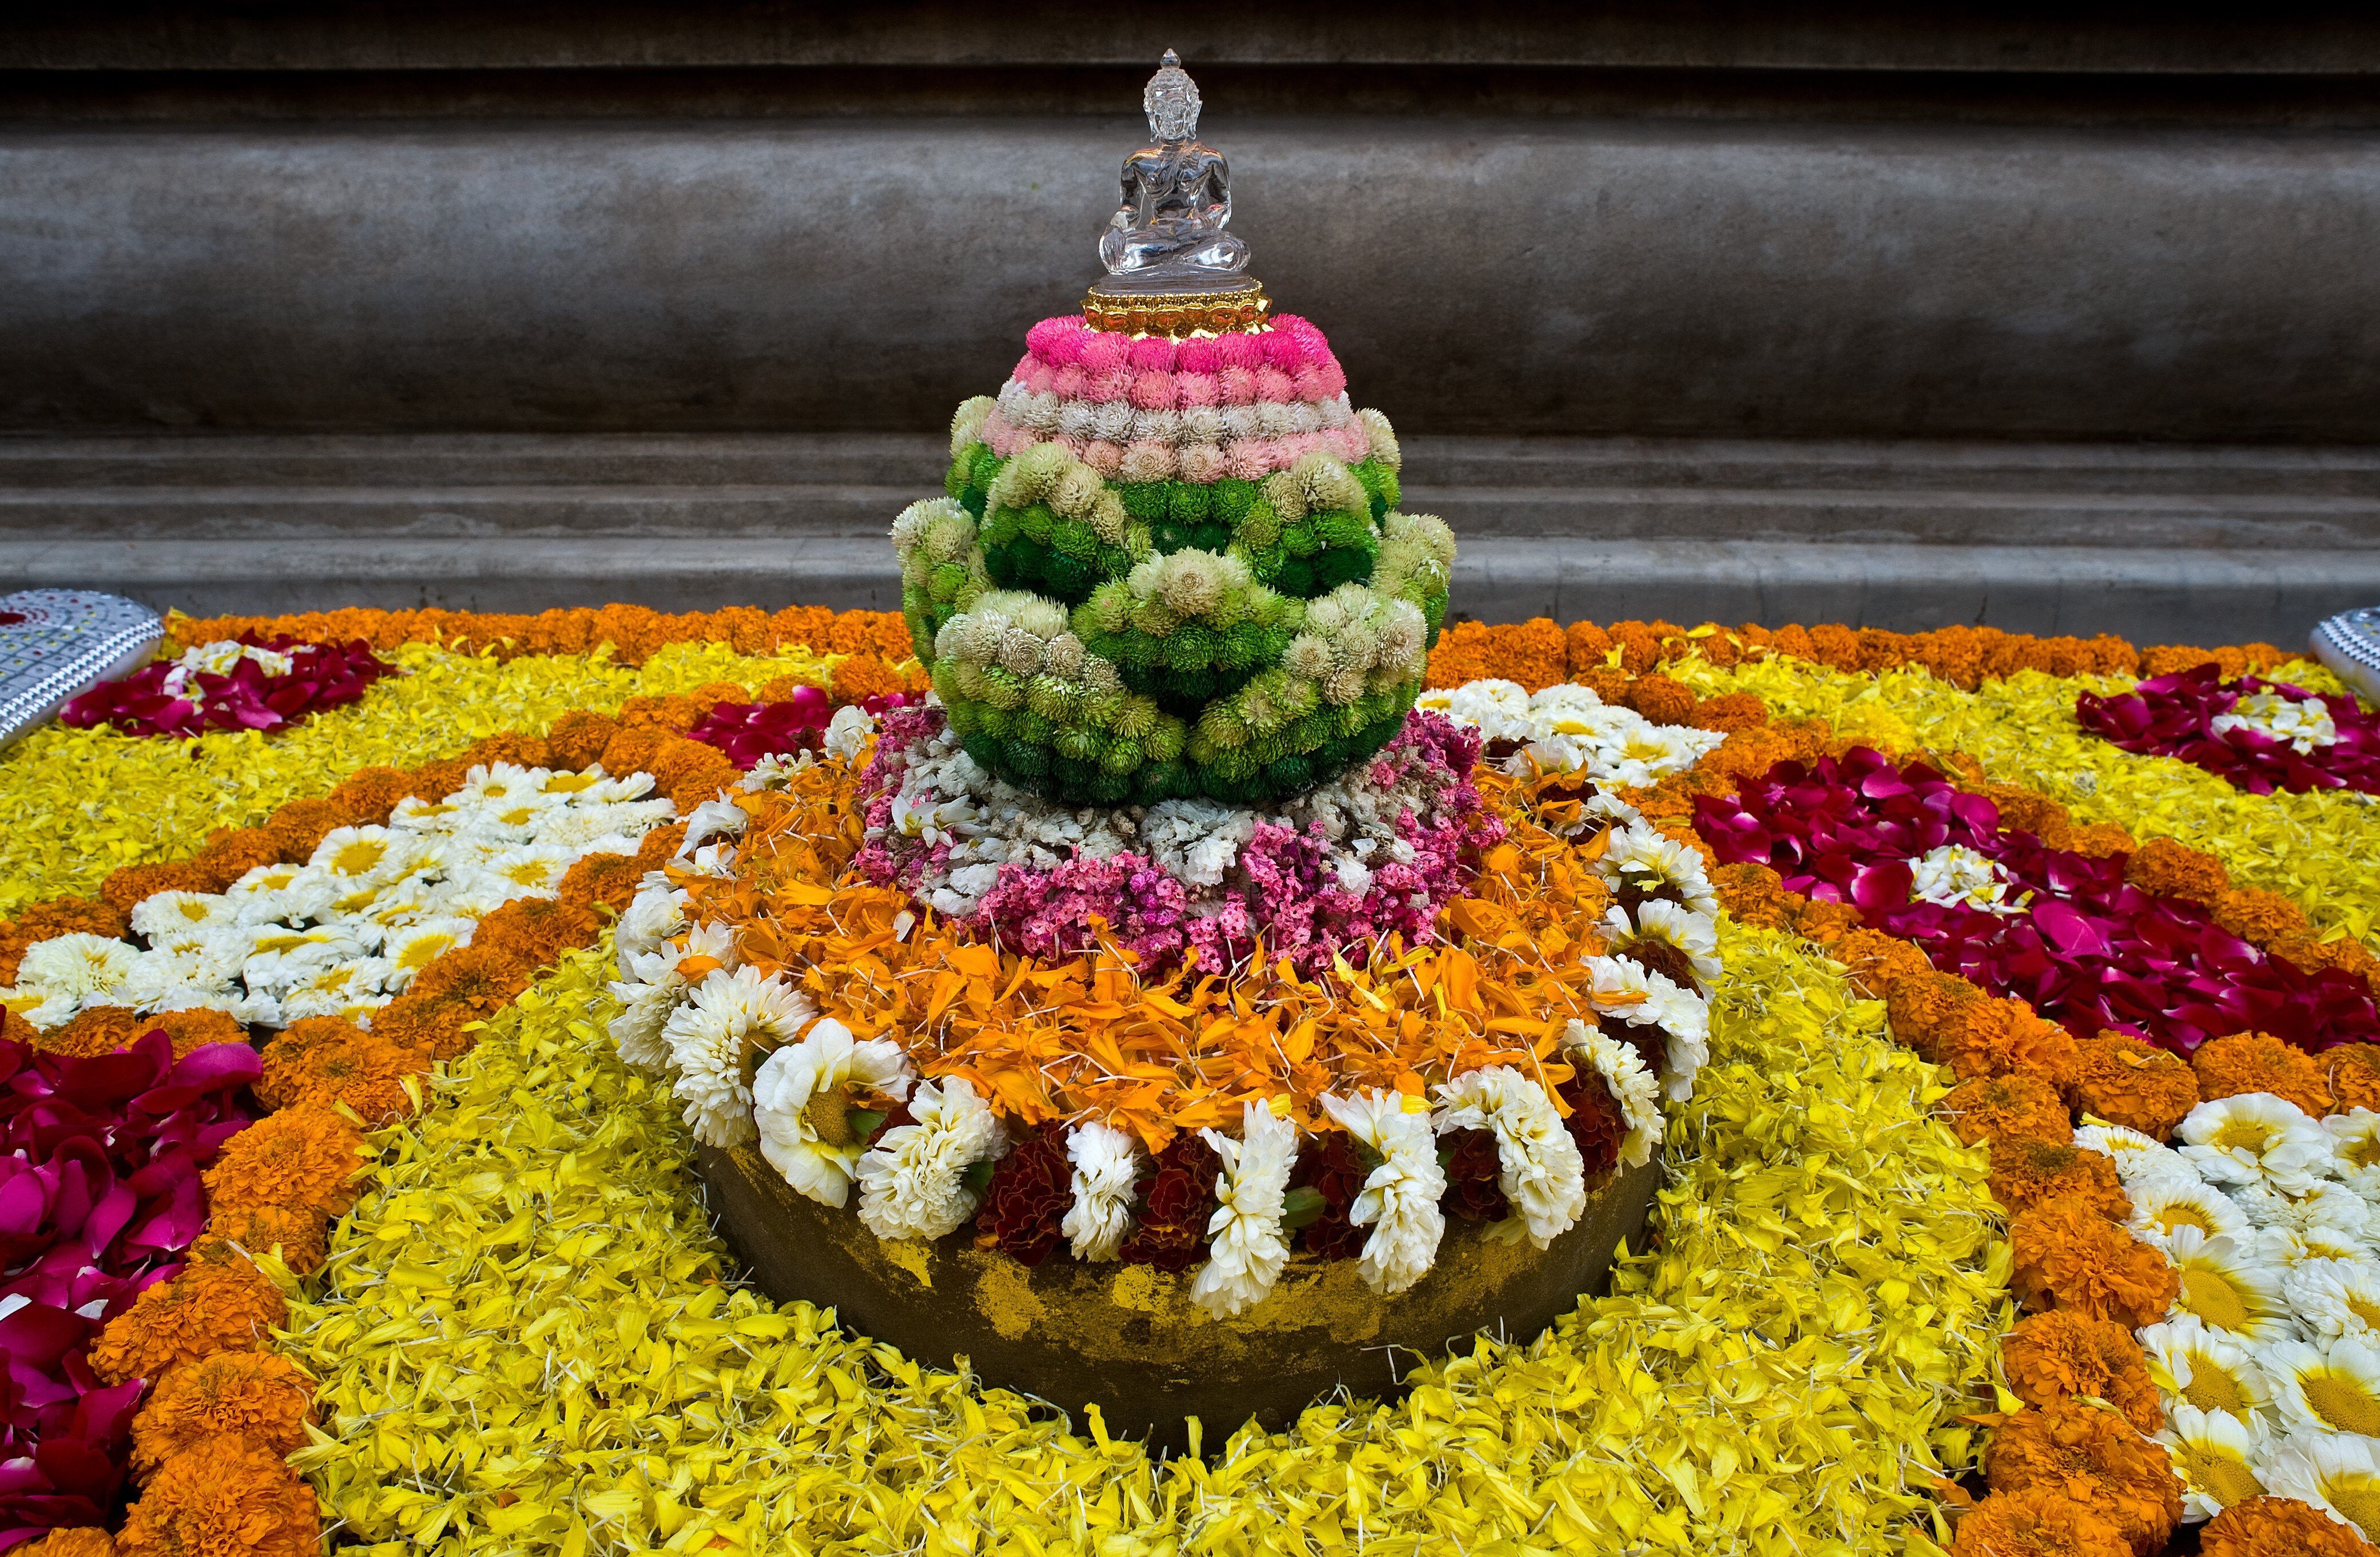 Flowers sit on and around a Buddhist statue at the Mahabodhi temple in Bodh Gaya, Bihar, India. Small companies are recycling some of the flowers left at India’s temples once they die. Photo: Getty Images